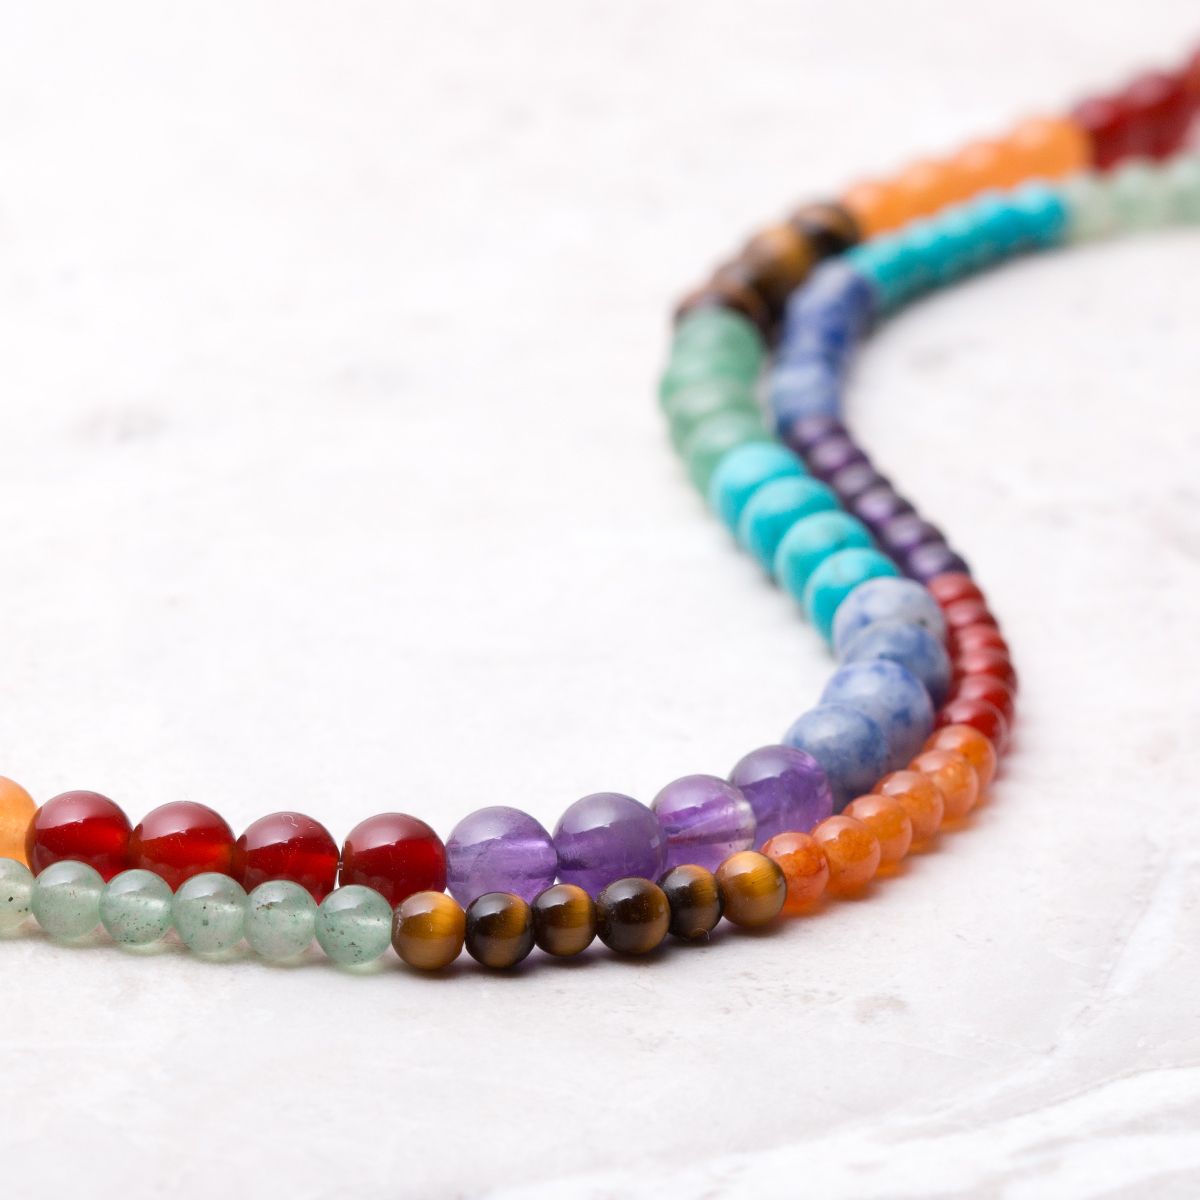 How To Make Your Own Chakra Jewellery